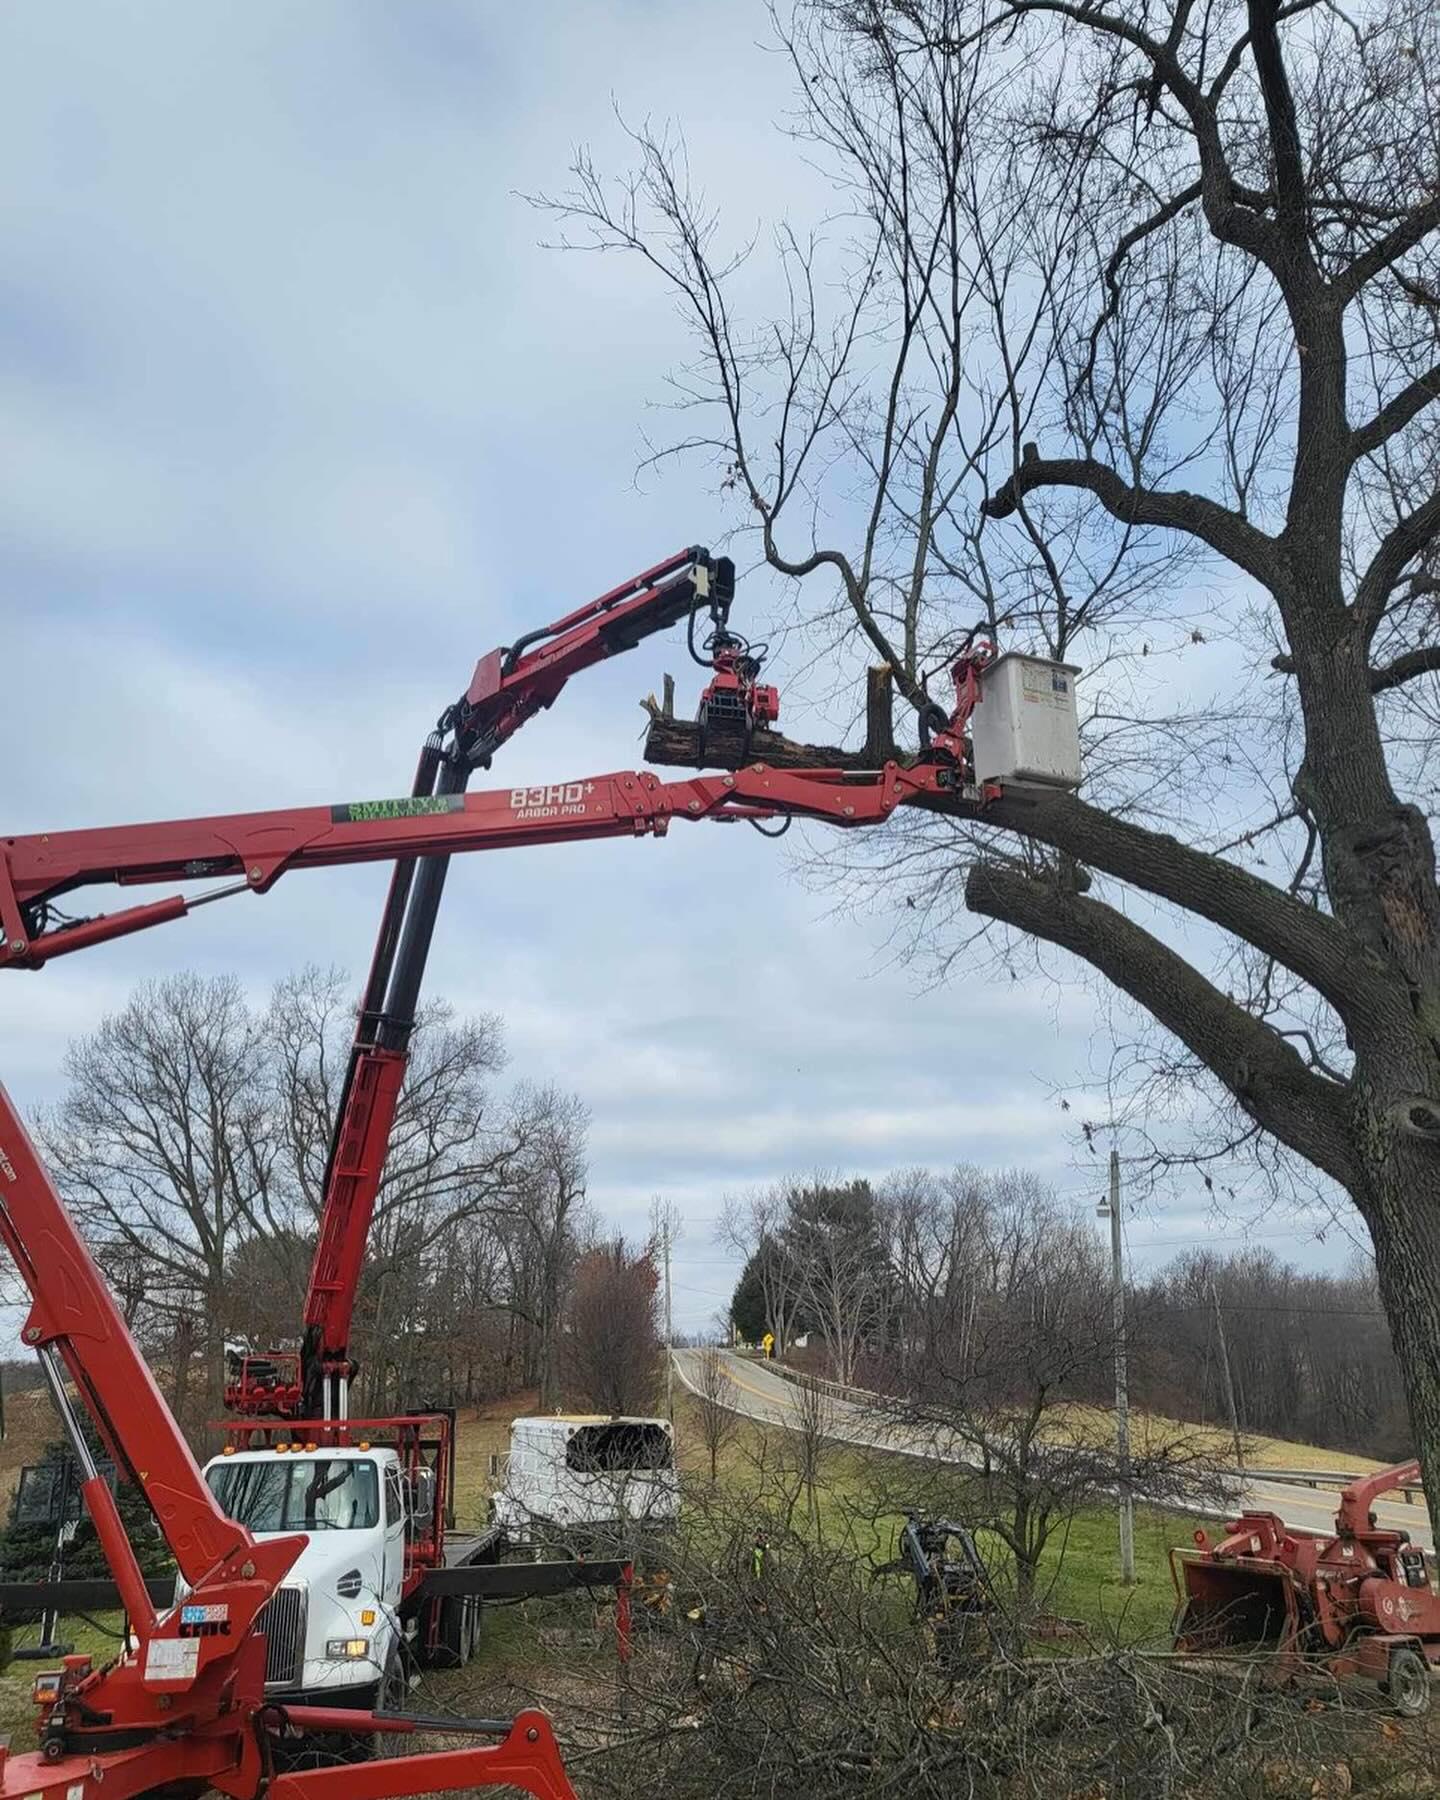 Whether you need lot clearing to make room for a housing development, a single stump removal in your yard, or storm damage cleanup, we have the tools and expertise to handle every job. And once the land is cleared, we also offer lawn install as a one-stop solution